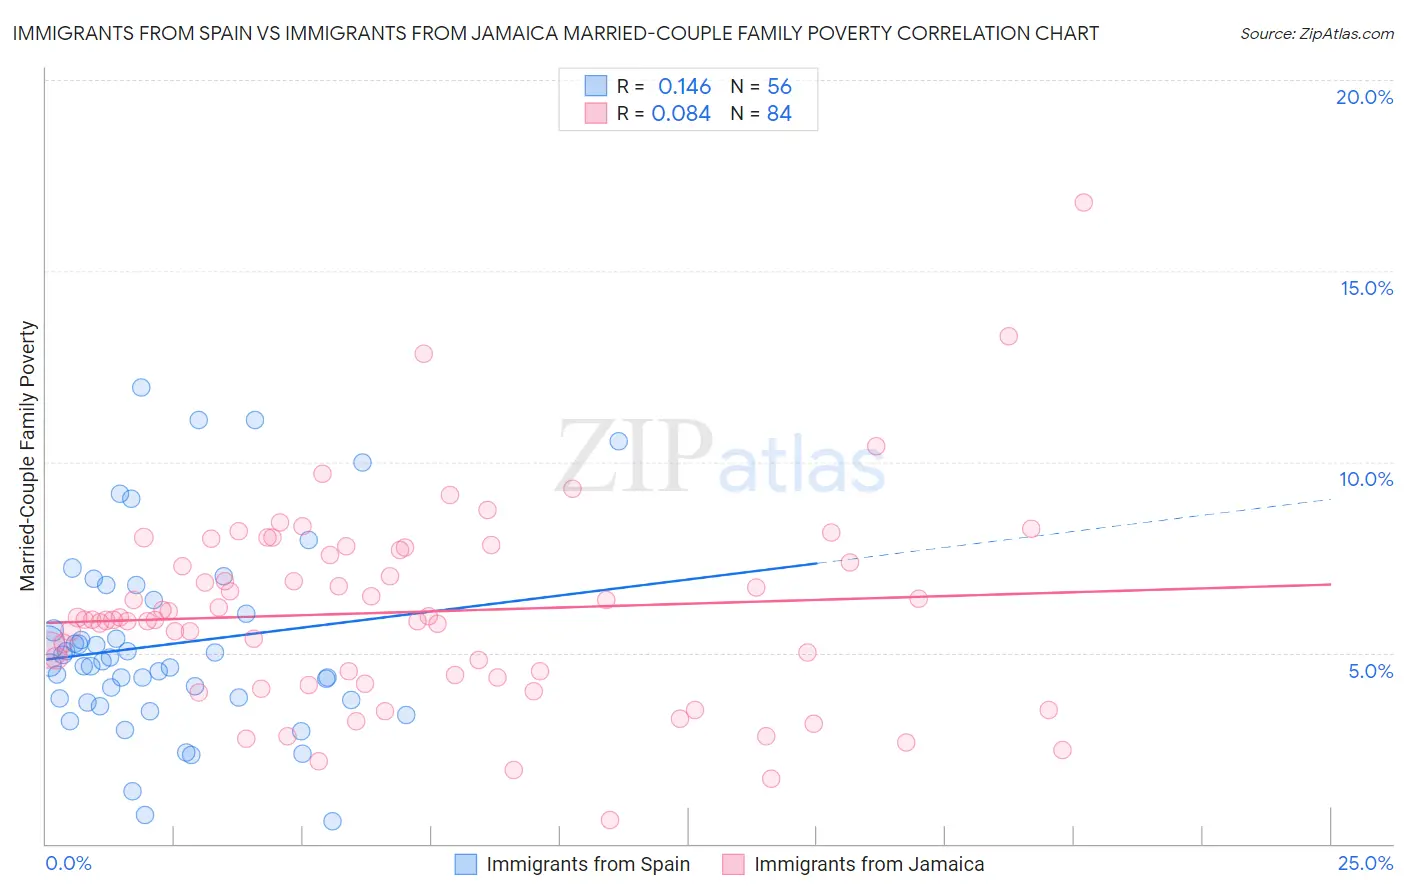 Immigrants from Spain vs Immigrants from Jamaica Married-Couple Family Poverty